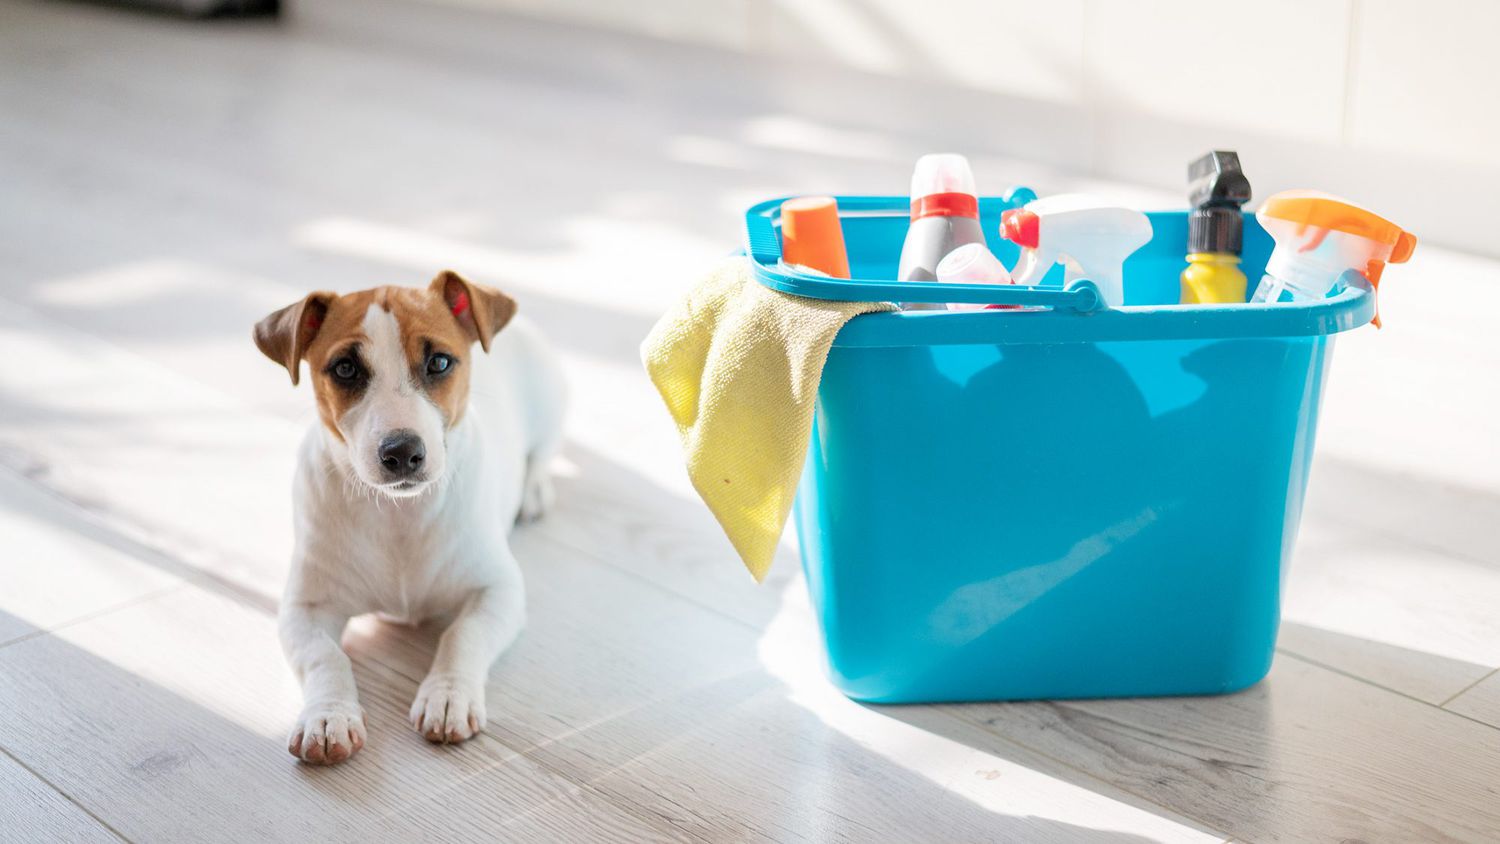 A puppy dog lies next to a blue bucket of cleaning products in the kitchen